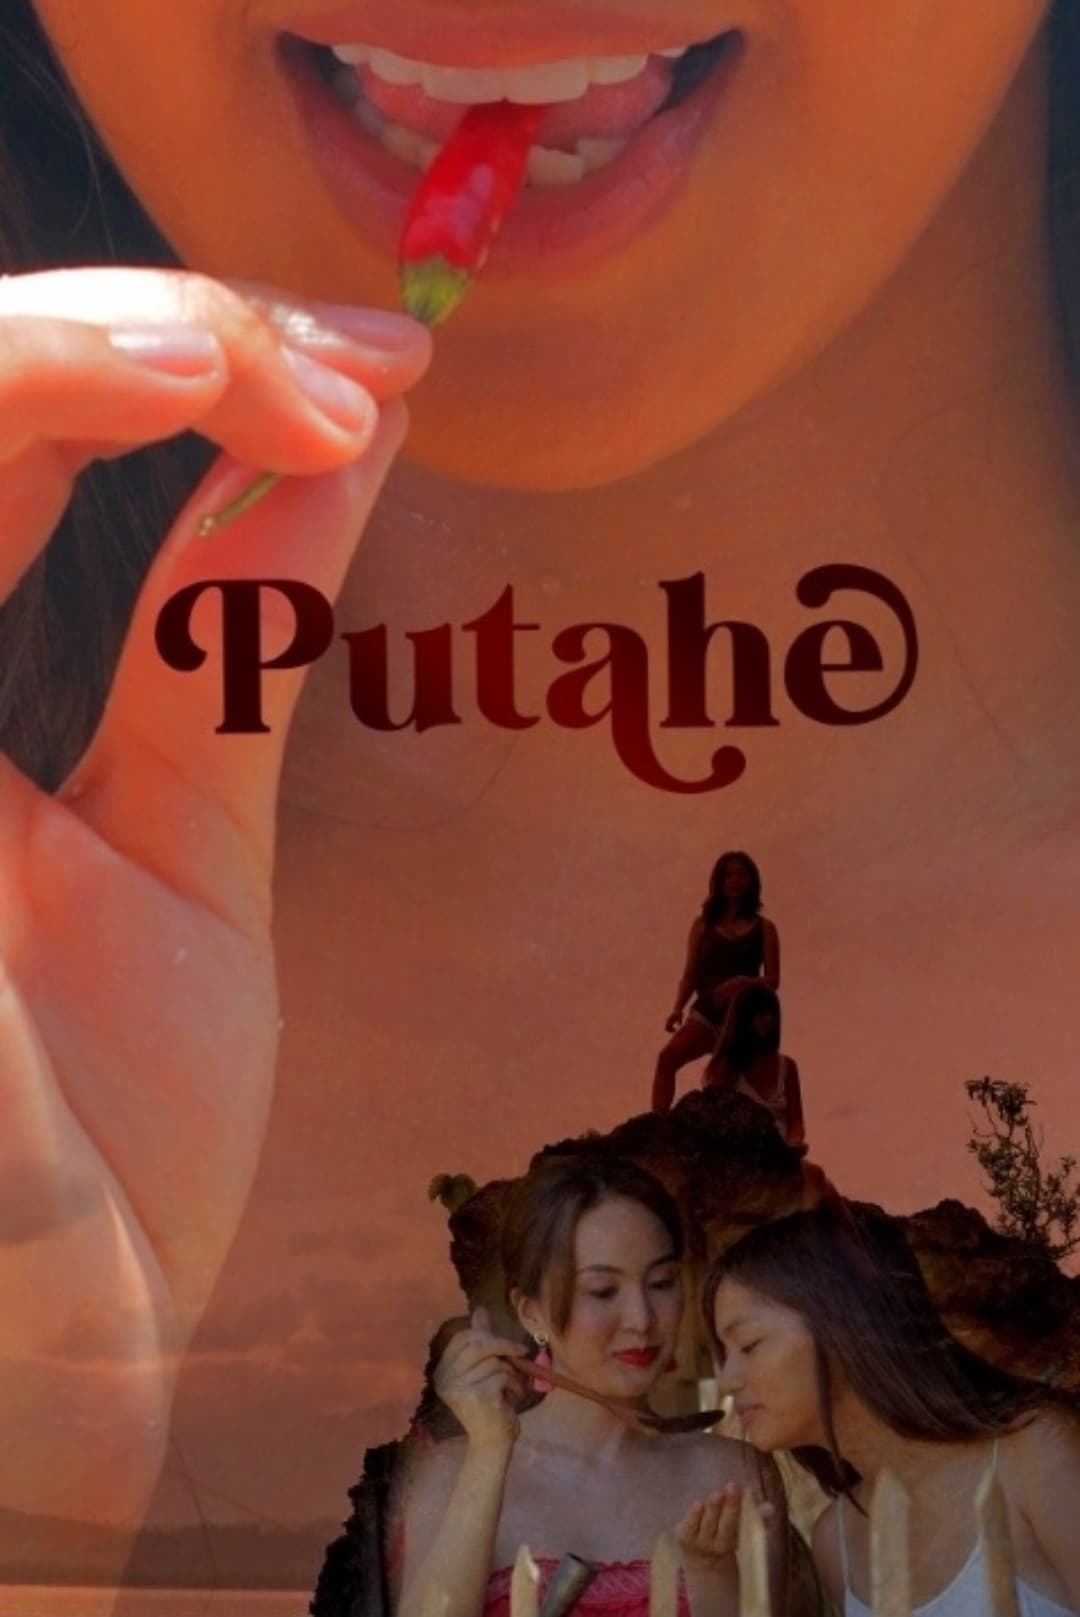 You are currently viewing Putahe 2022 Hollywood Hot Movie 720p HDRip 600MB Download & Watch Online